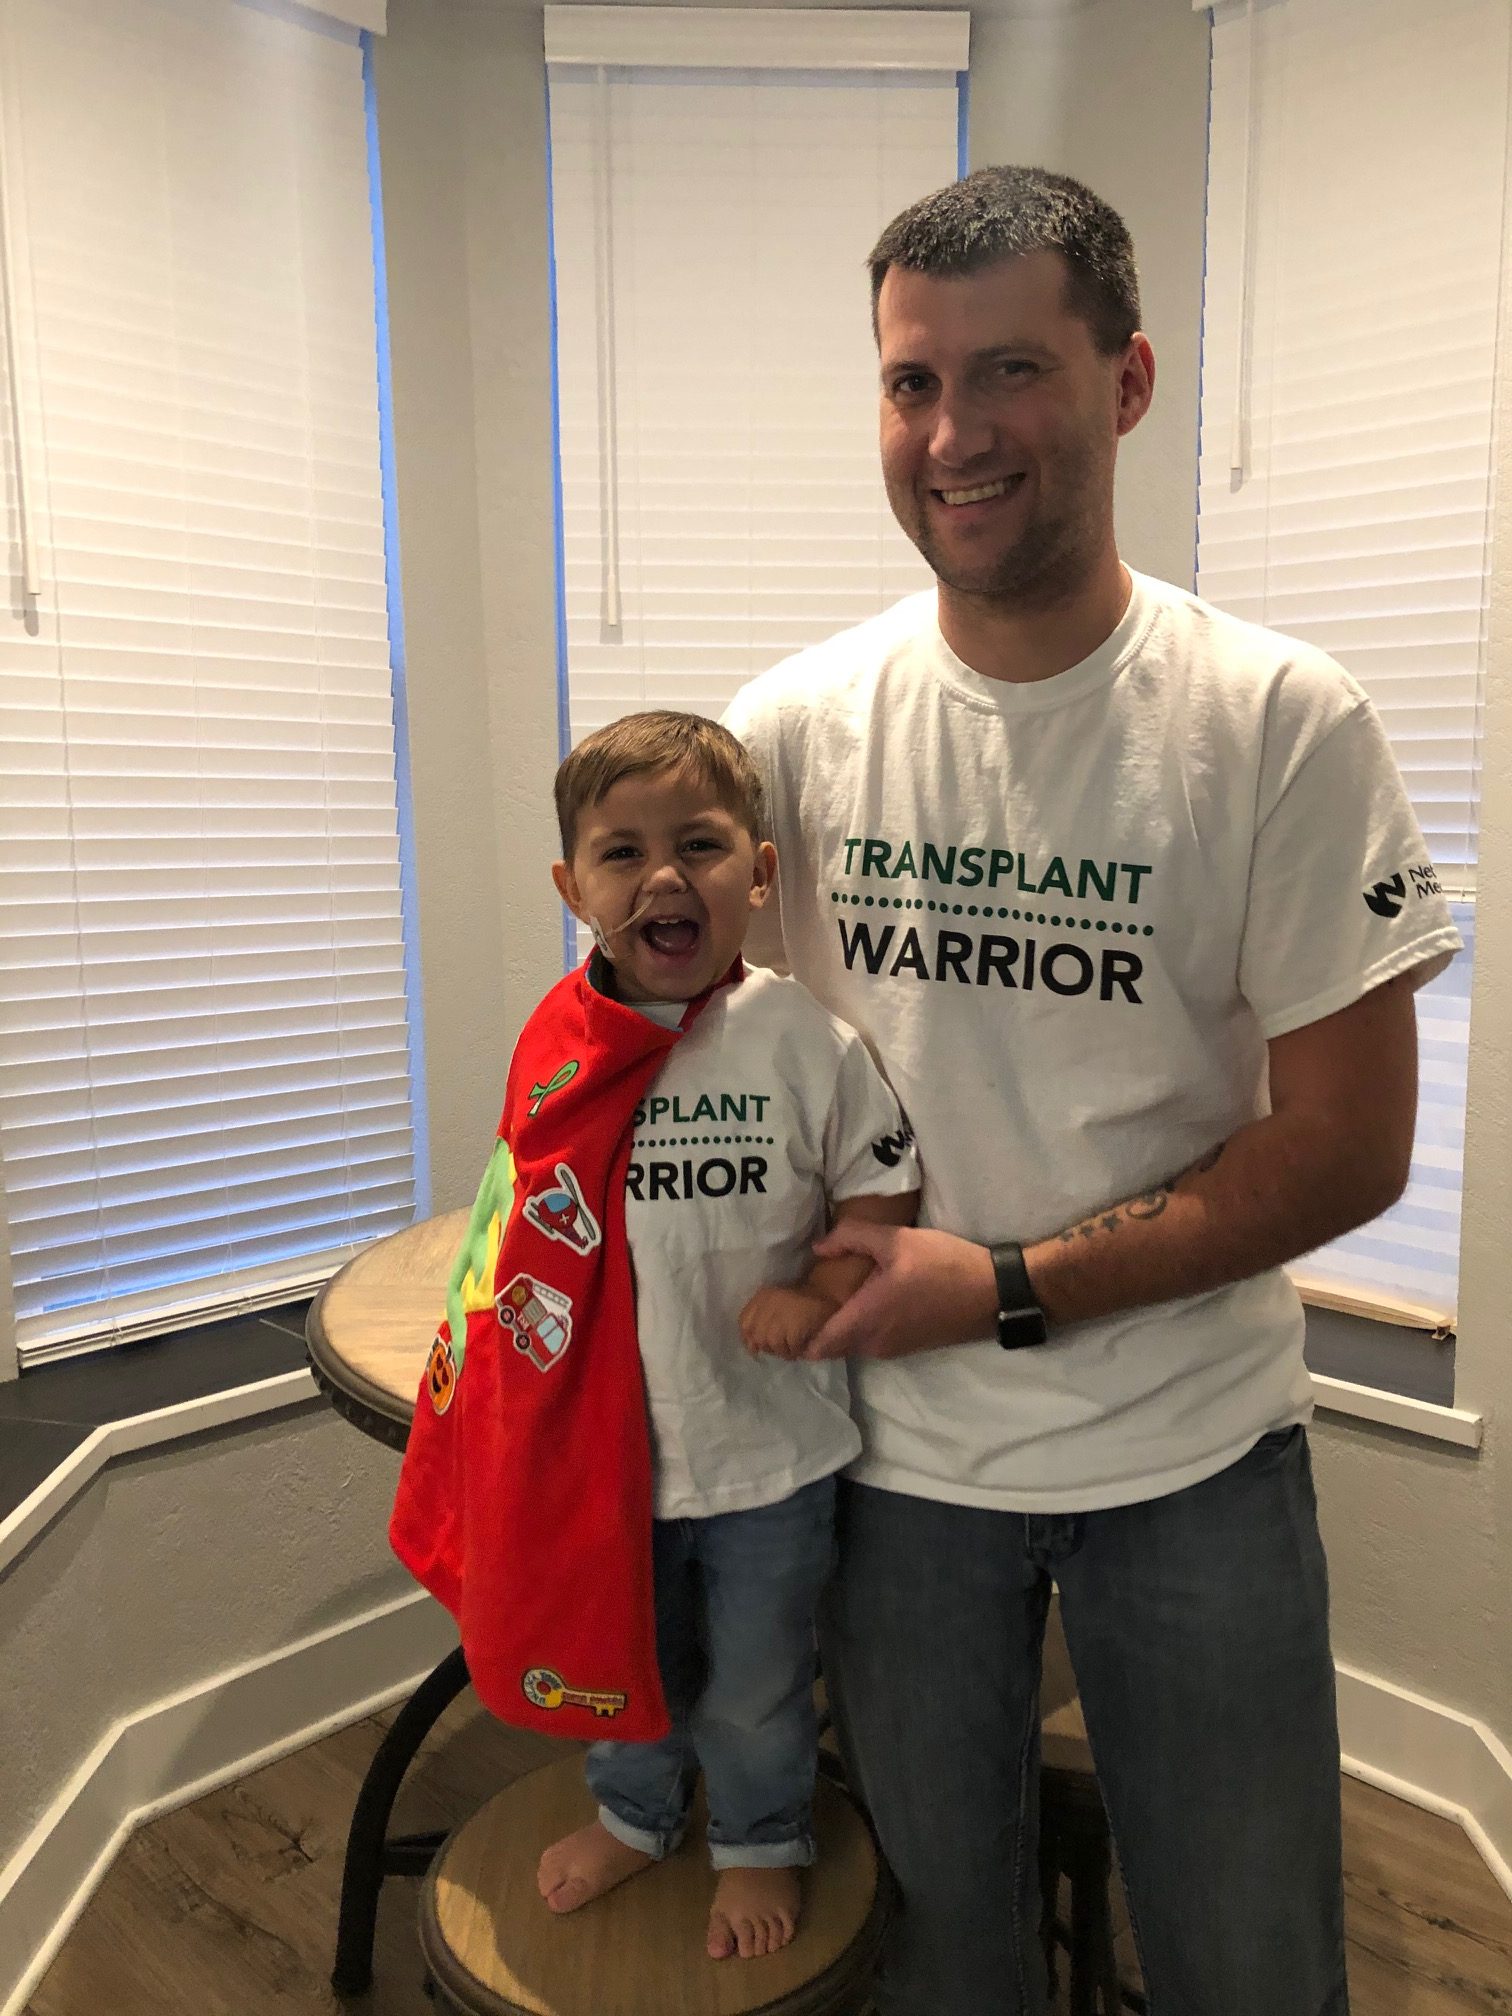 Ethan and his dad Zac poses with TRANSPLANT WARRIOR T-shirts. Zac donated a kidney to Ethan.